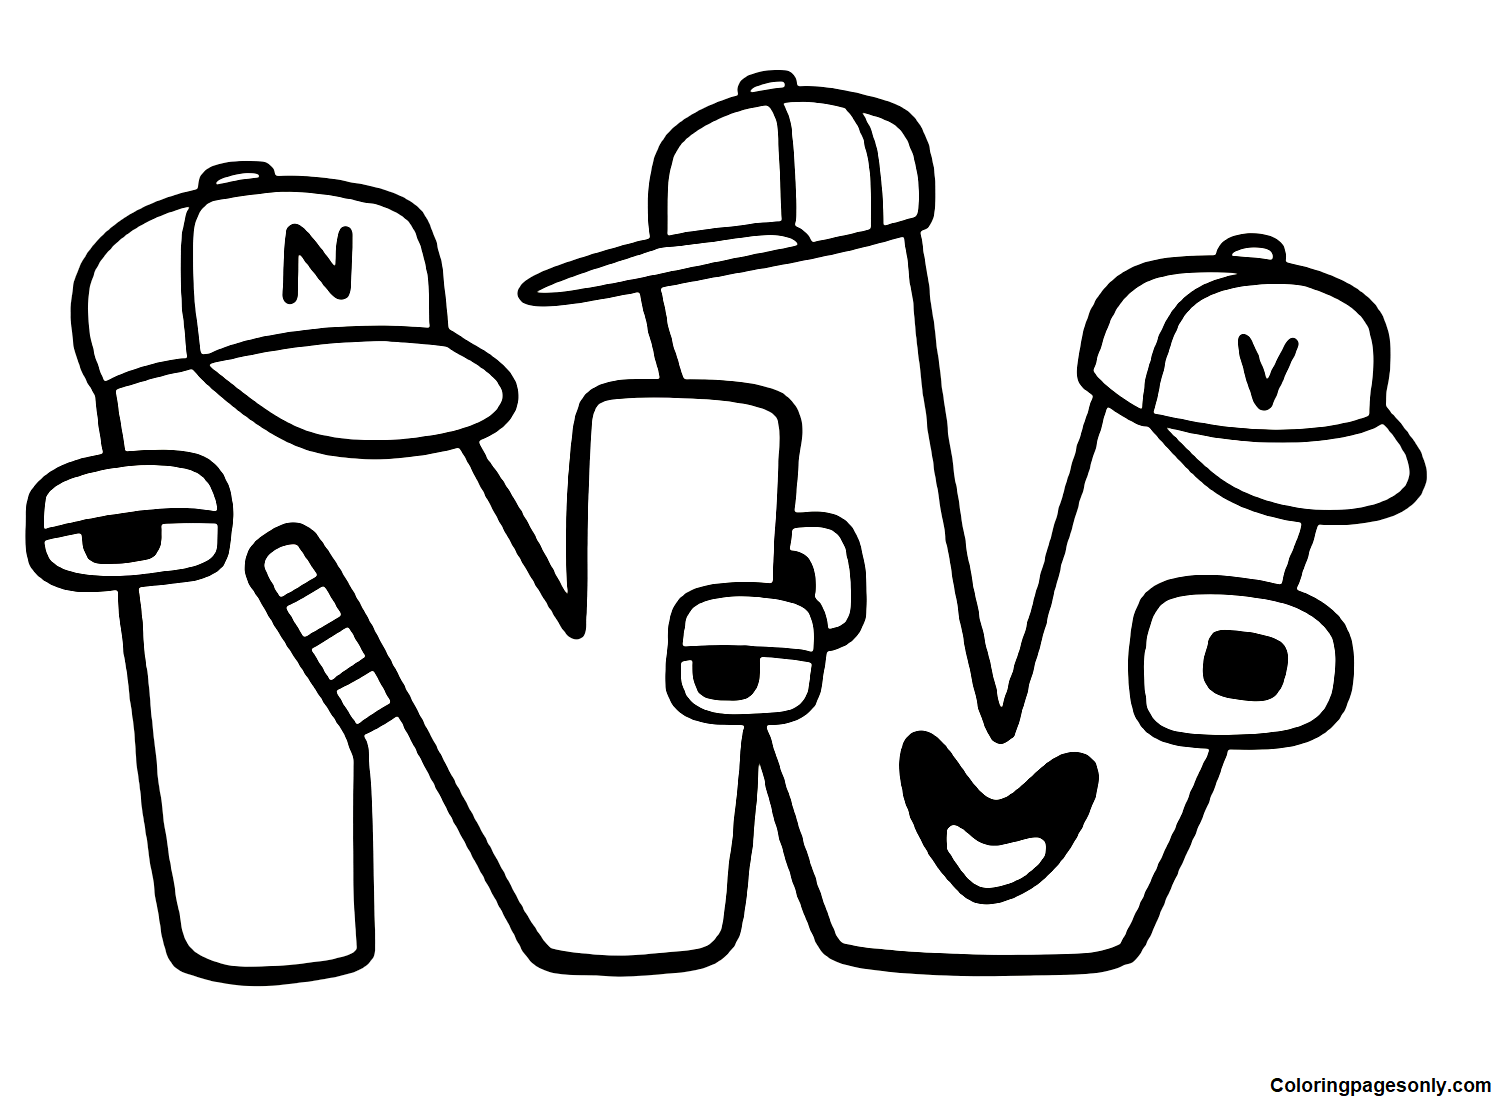 Alphabet Lore Letter N and V Coloring Page